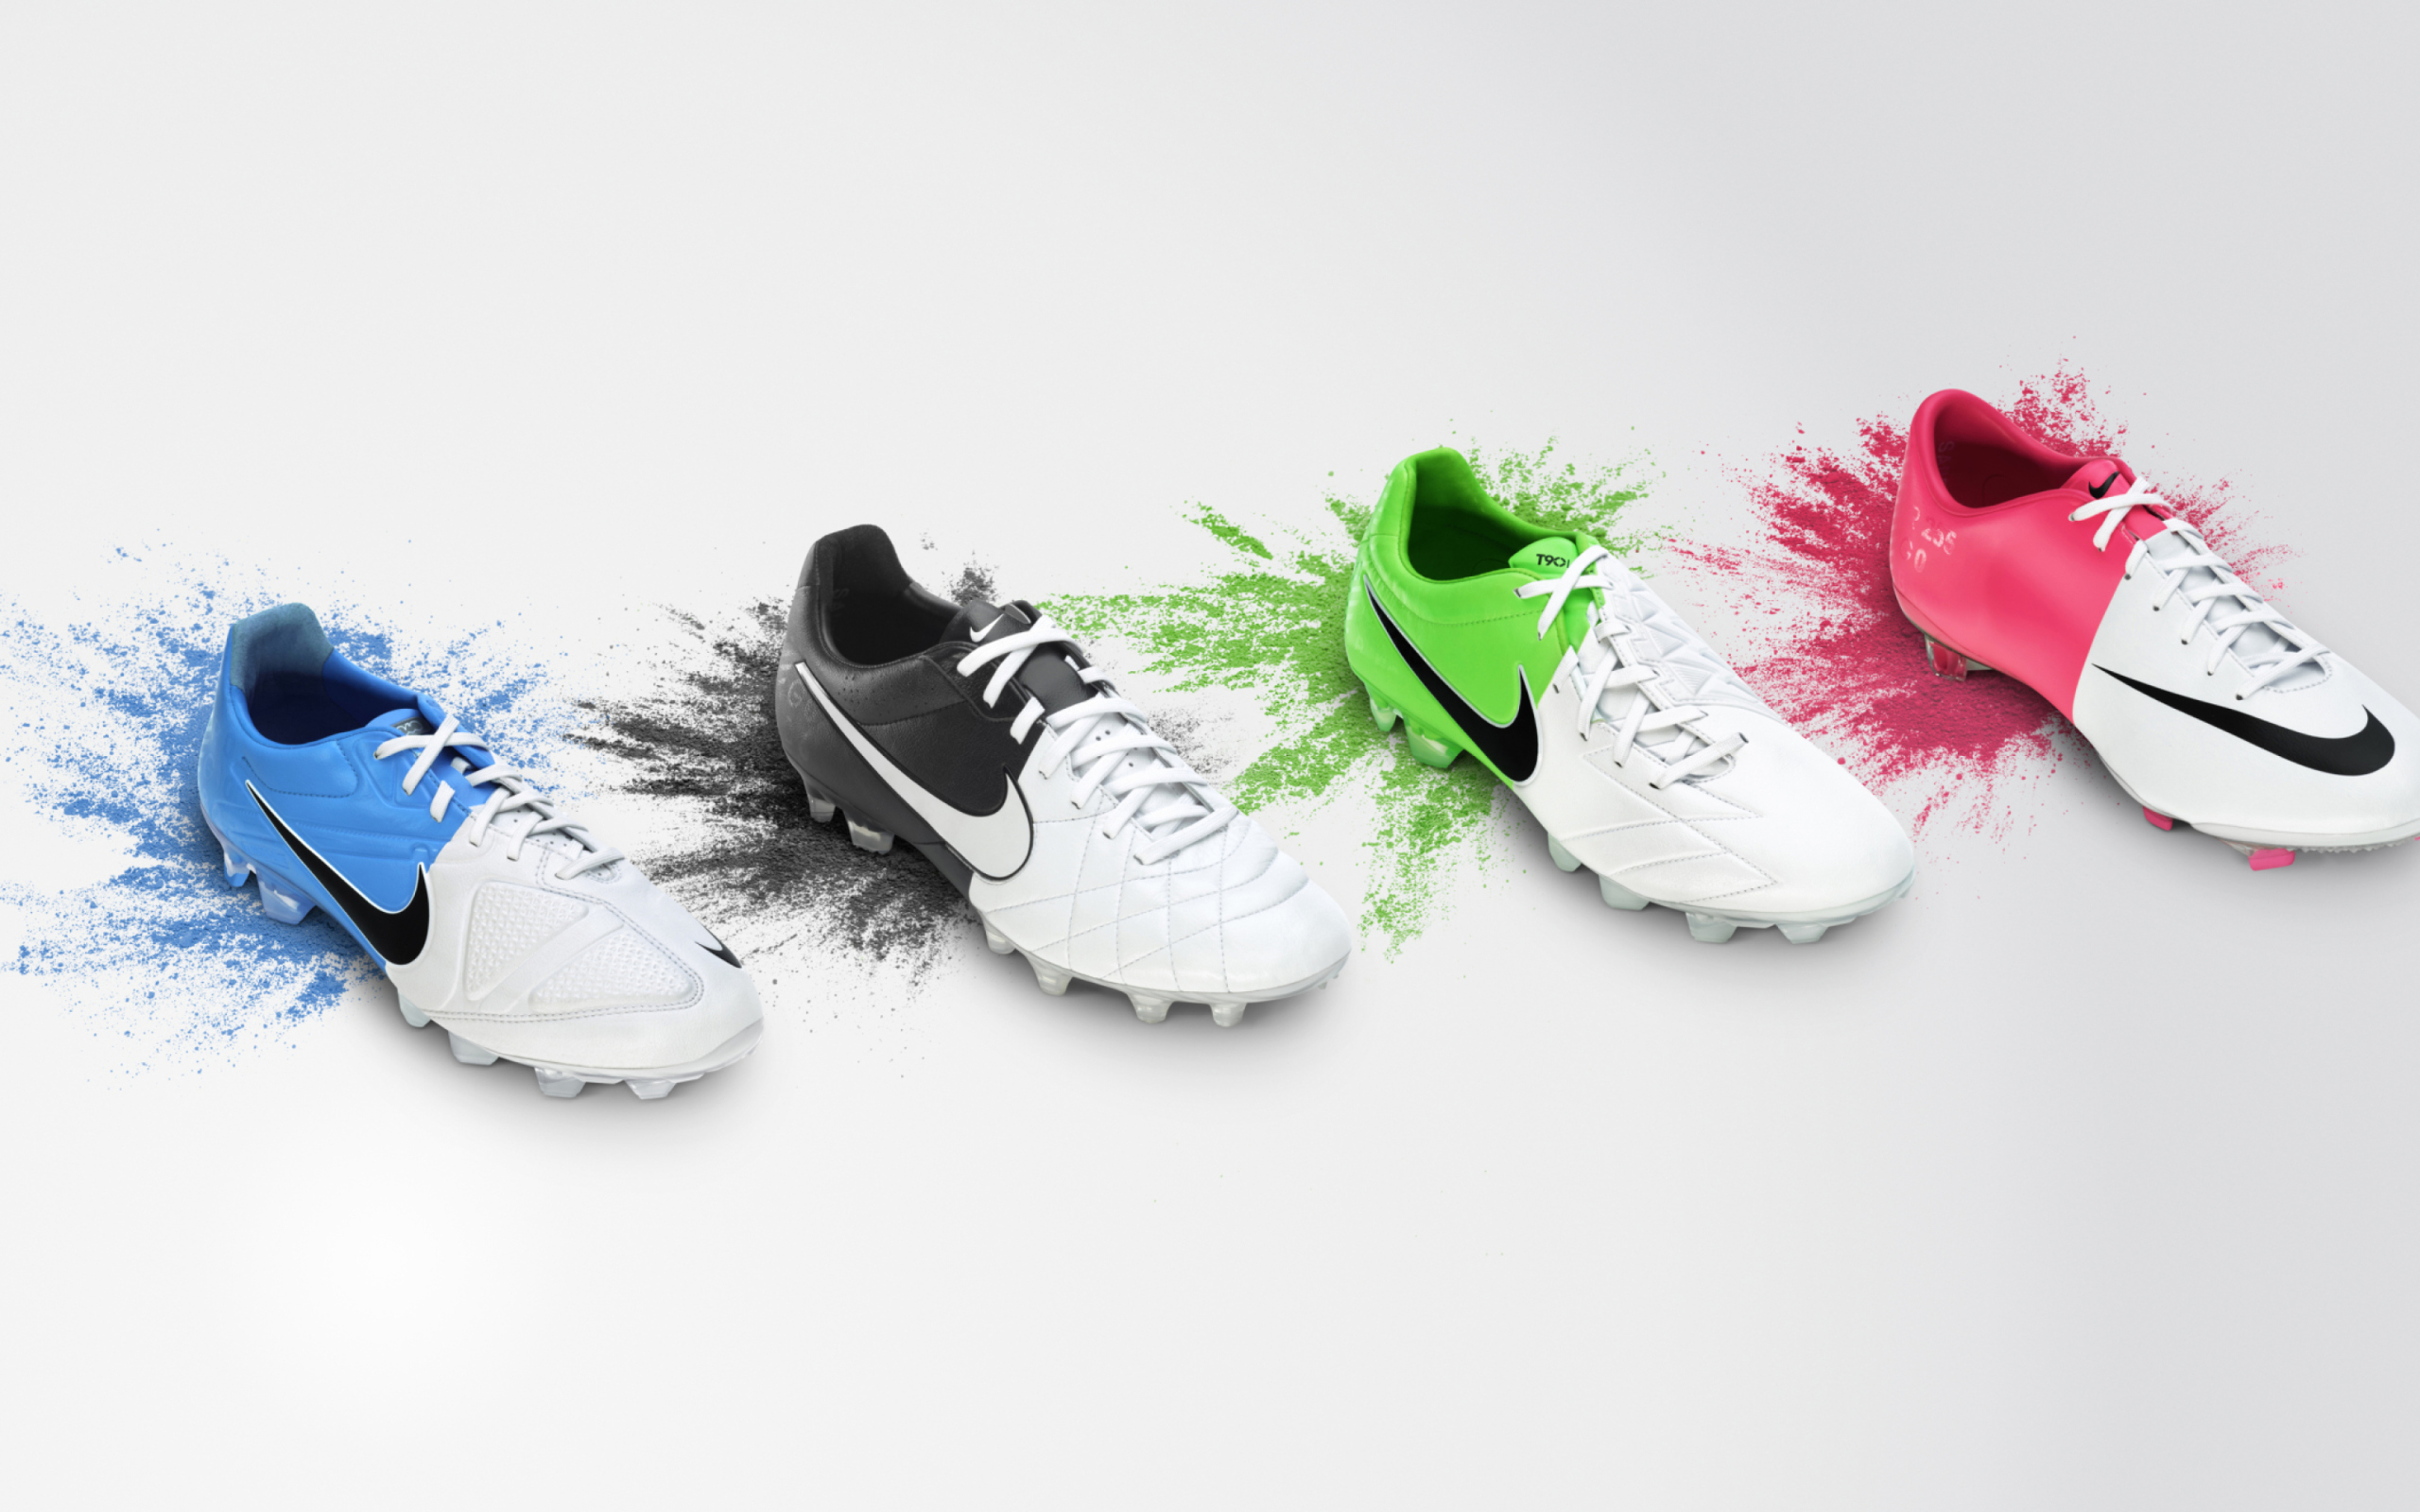 Nike - Clash Collection wallpaper 2560x1600